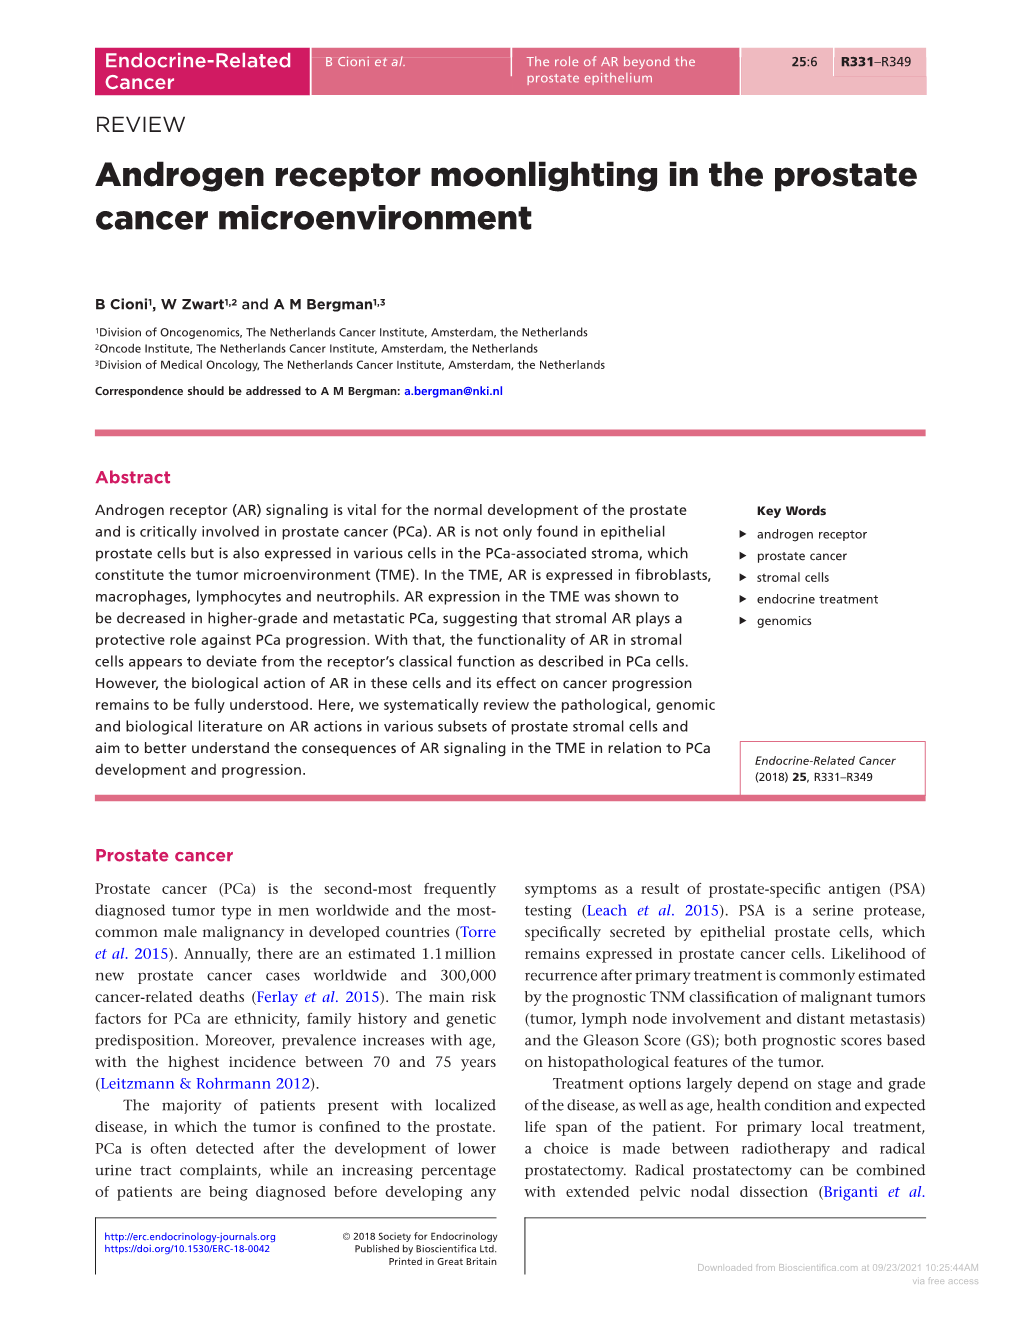 Androgen Receptor Moonlighting in the Prostate Cancer Microenvironment